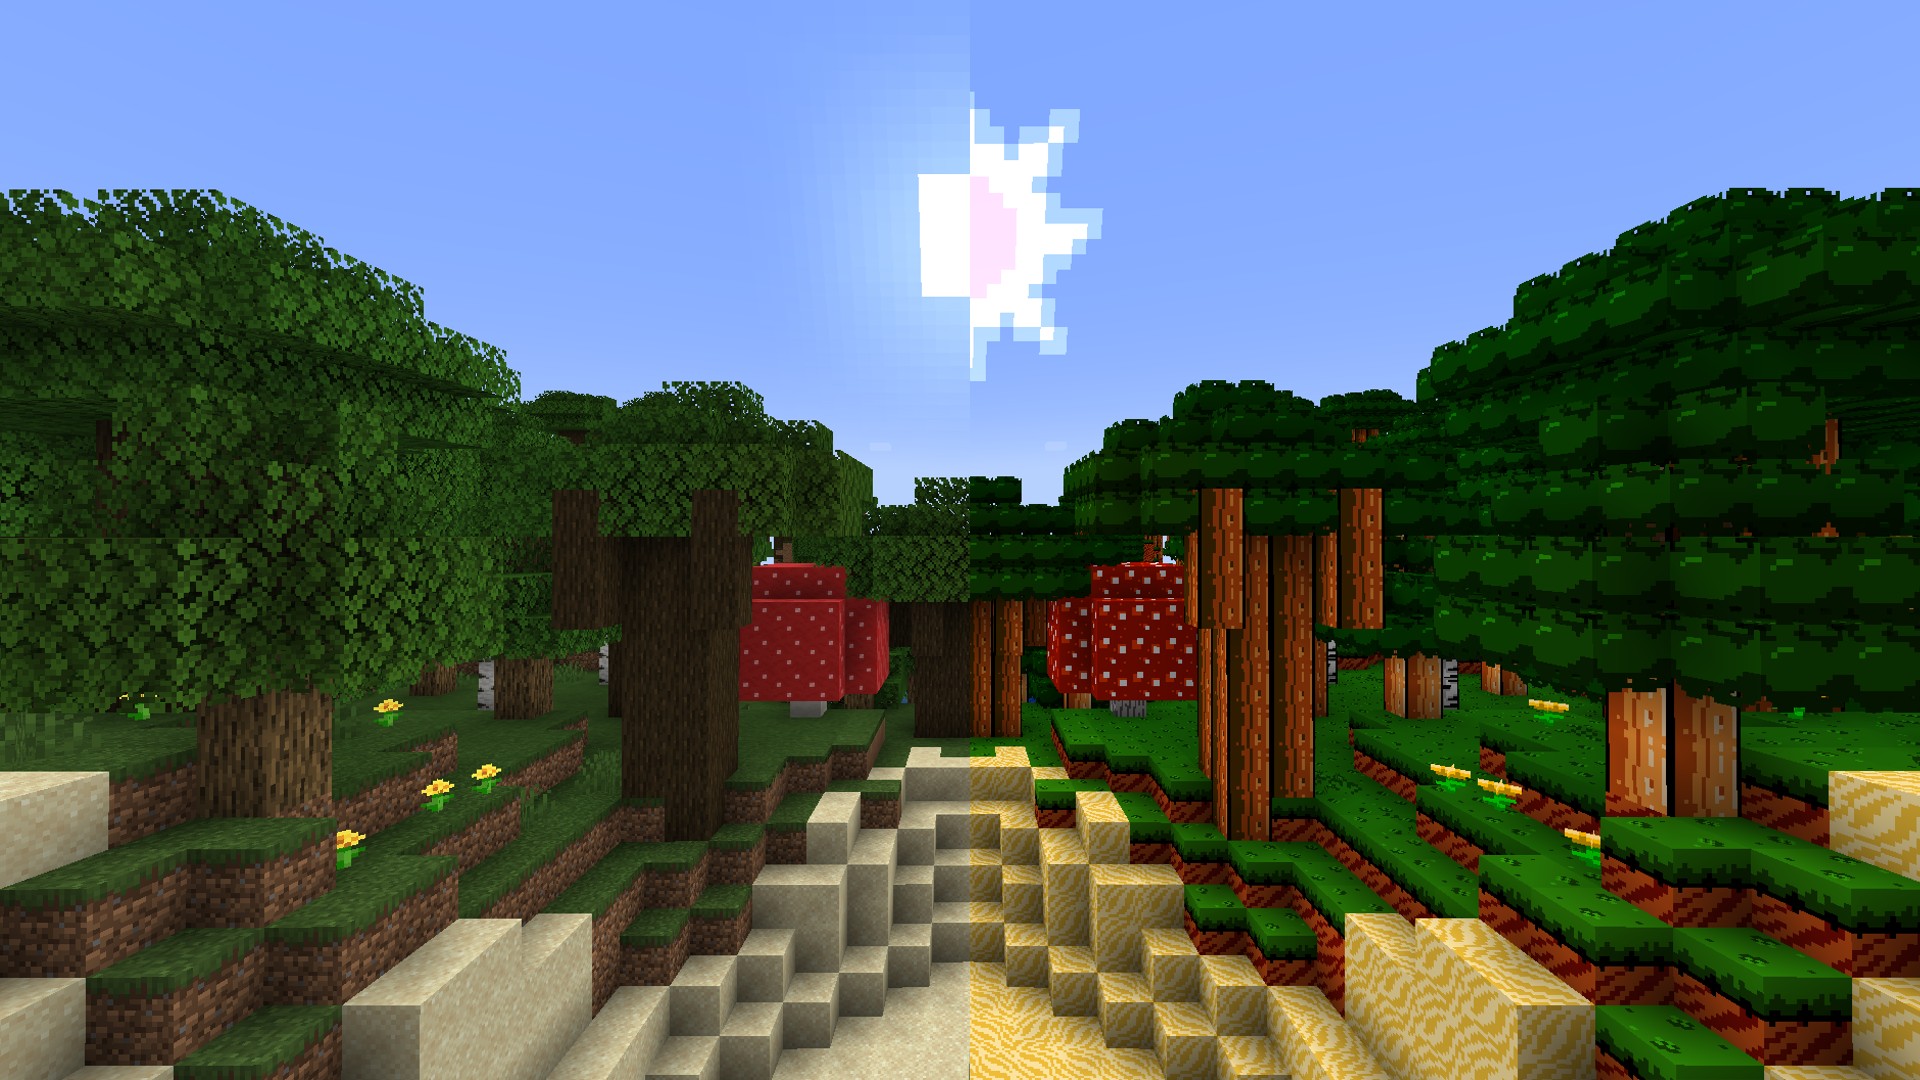 The 11 best Minecraft texture packs to download 2023 |